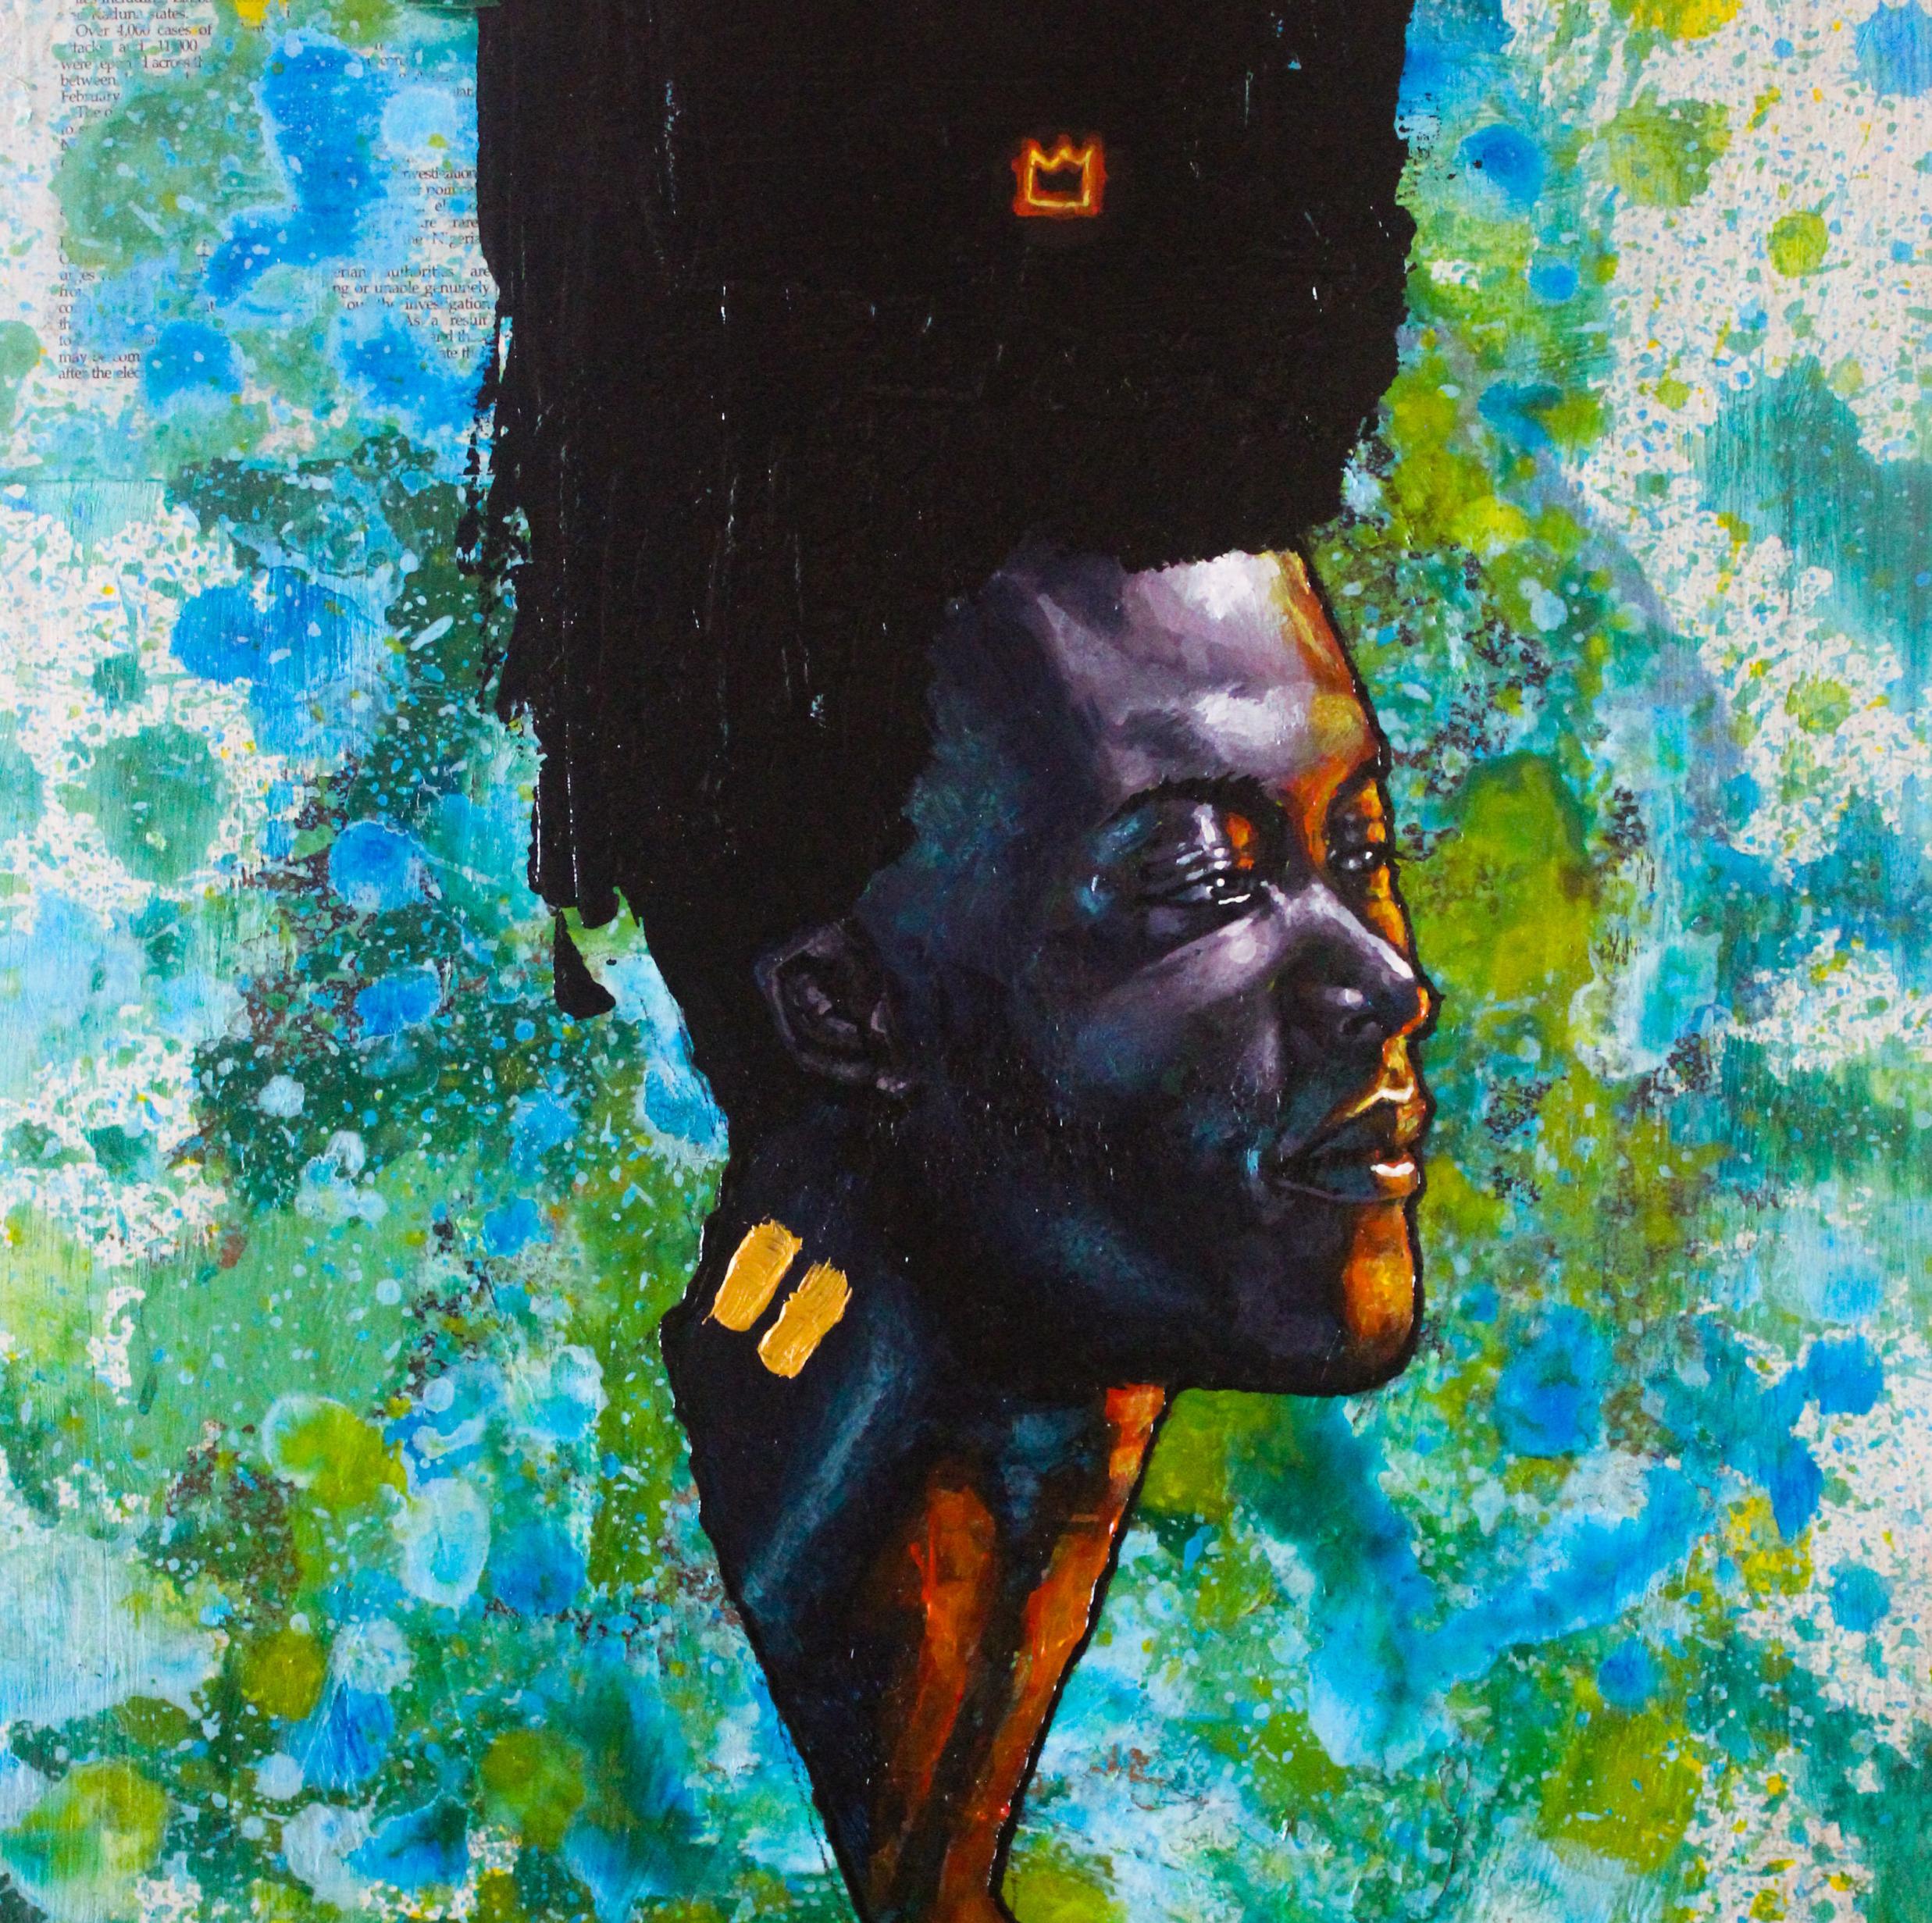 Golden Equality 1 - Neo-Expressionist Painting by Aluu Prosper Chigozie 